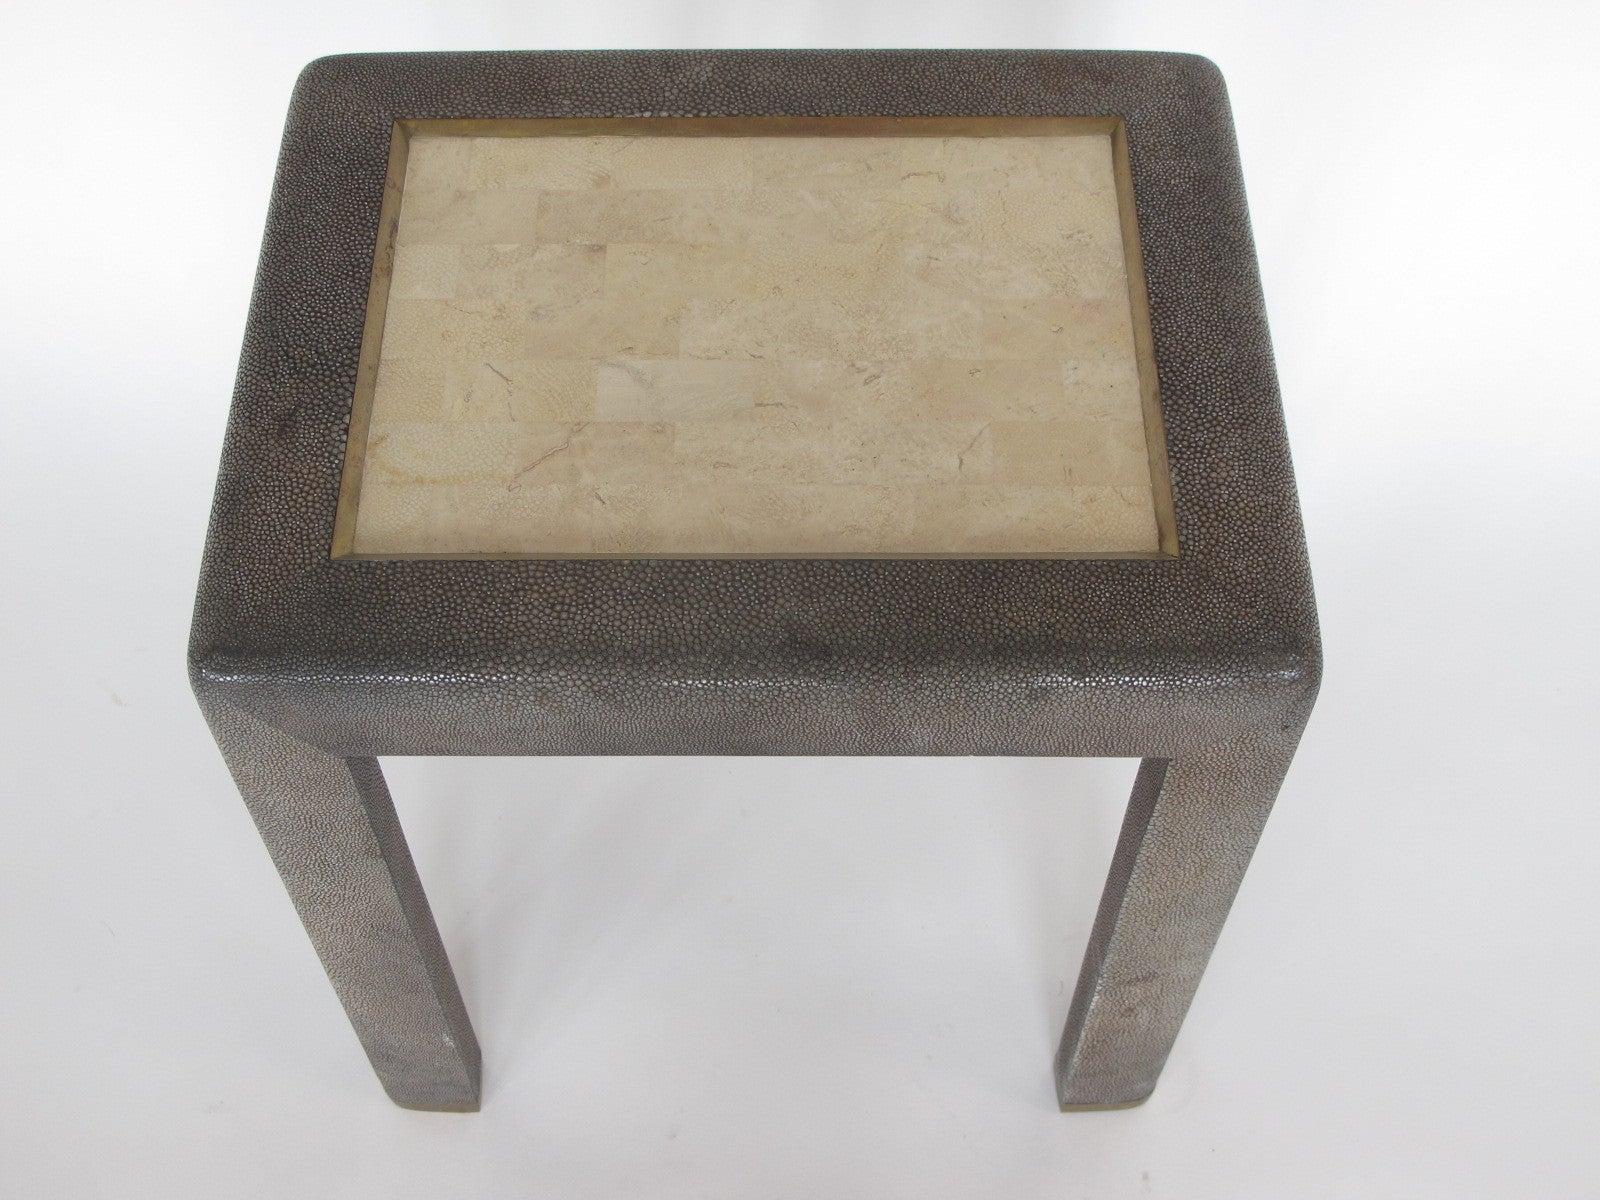 Elegant Table by Maitland-Smith In Shagreen and Tessellated Stone